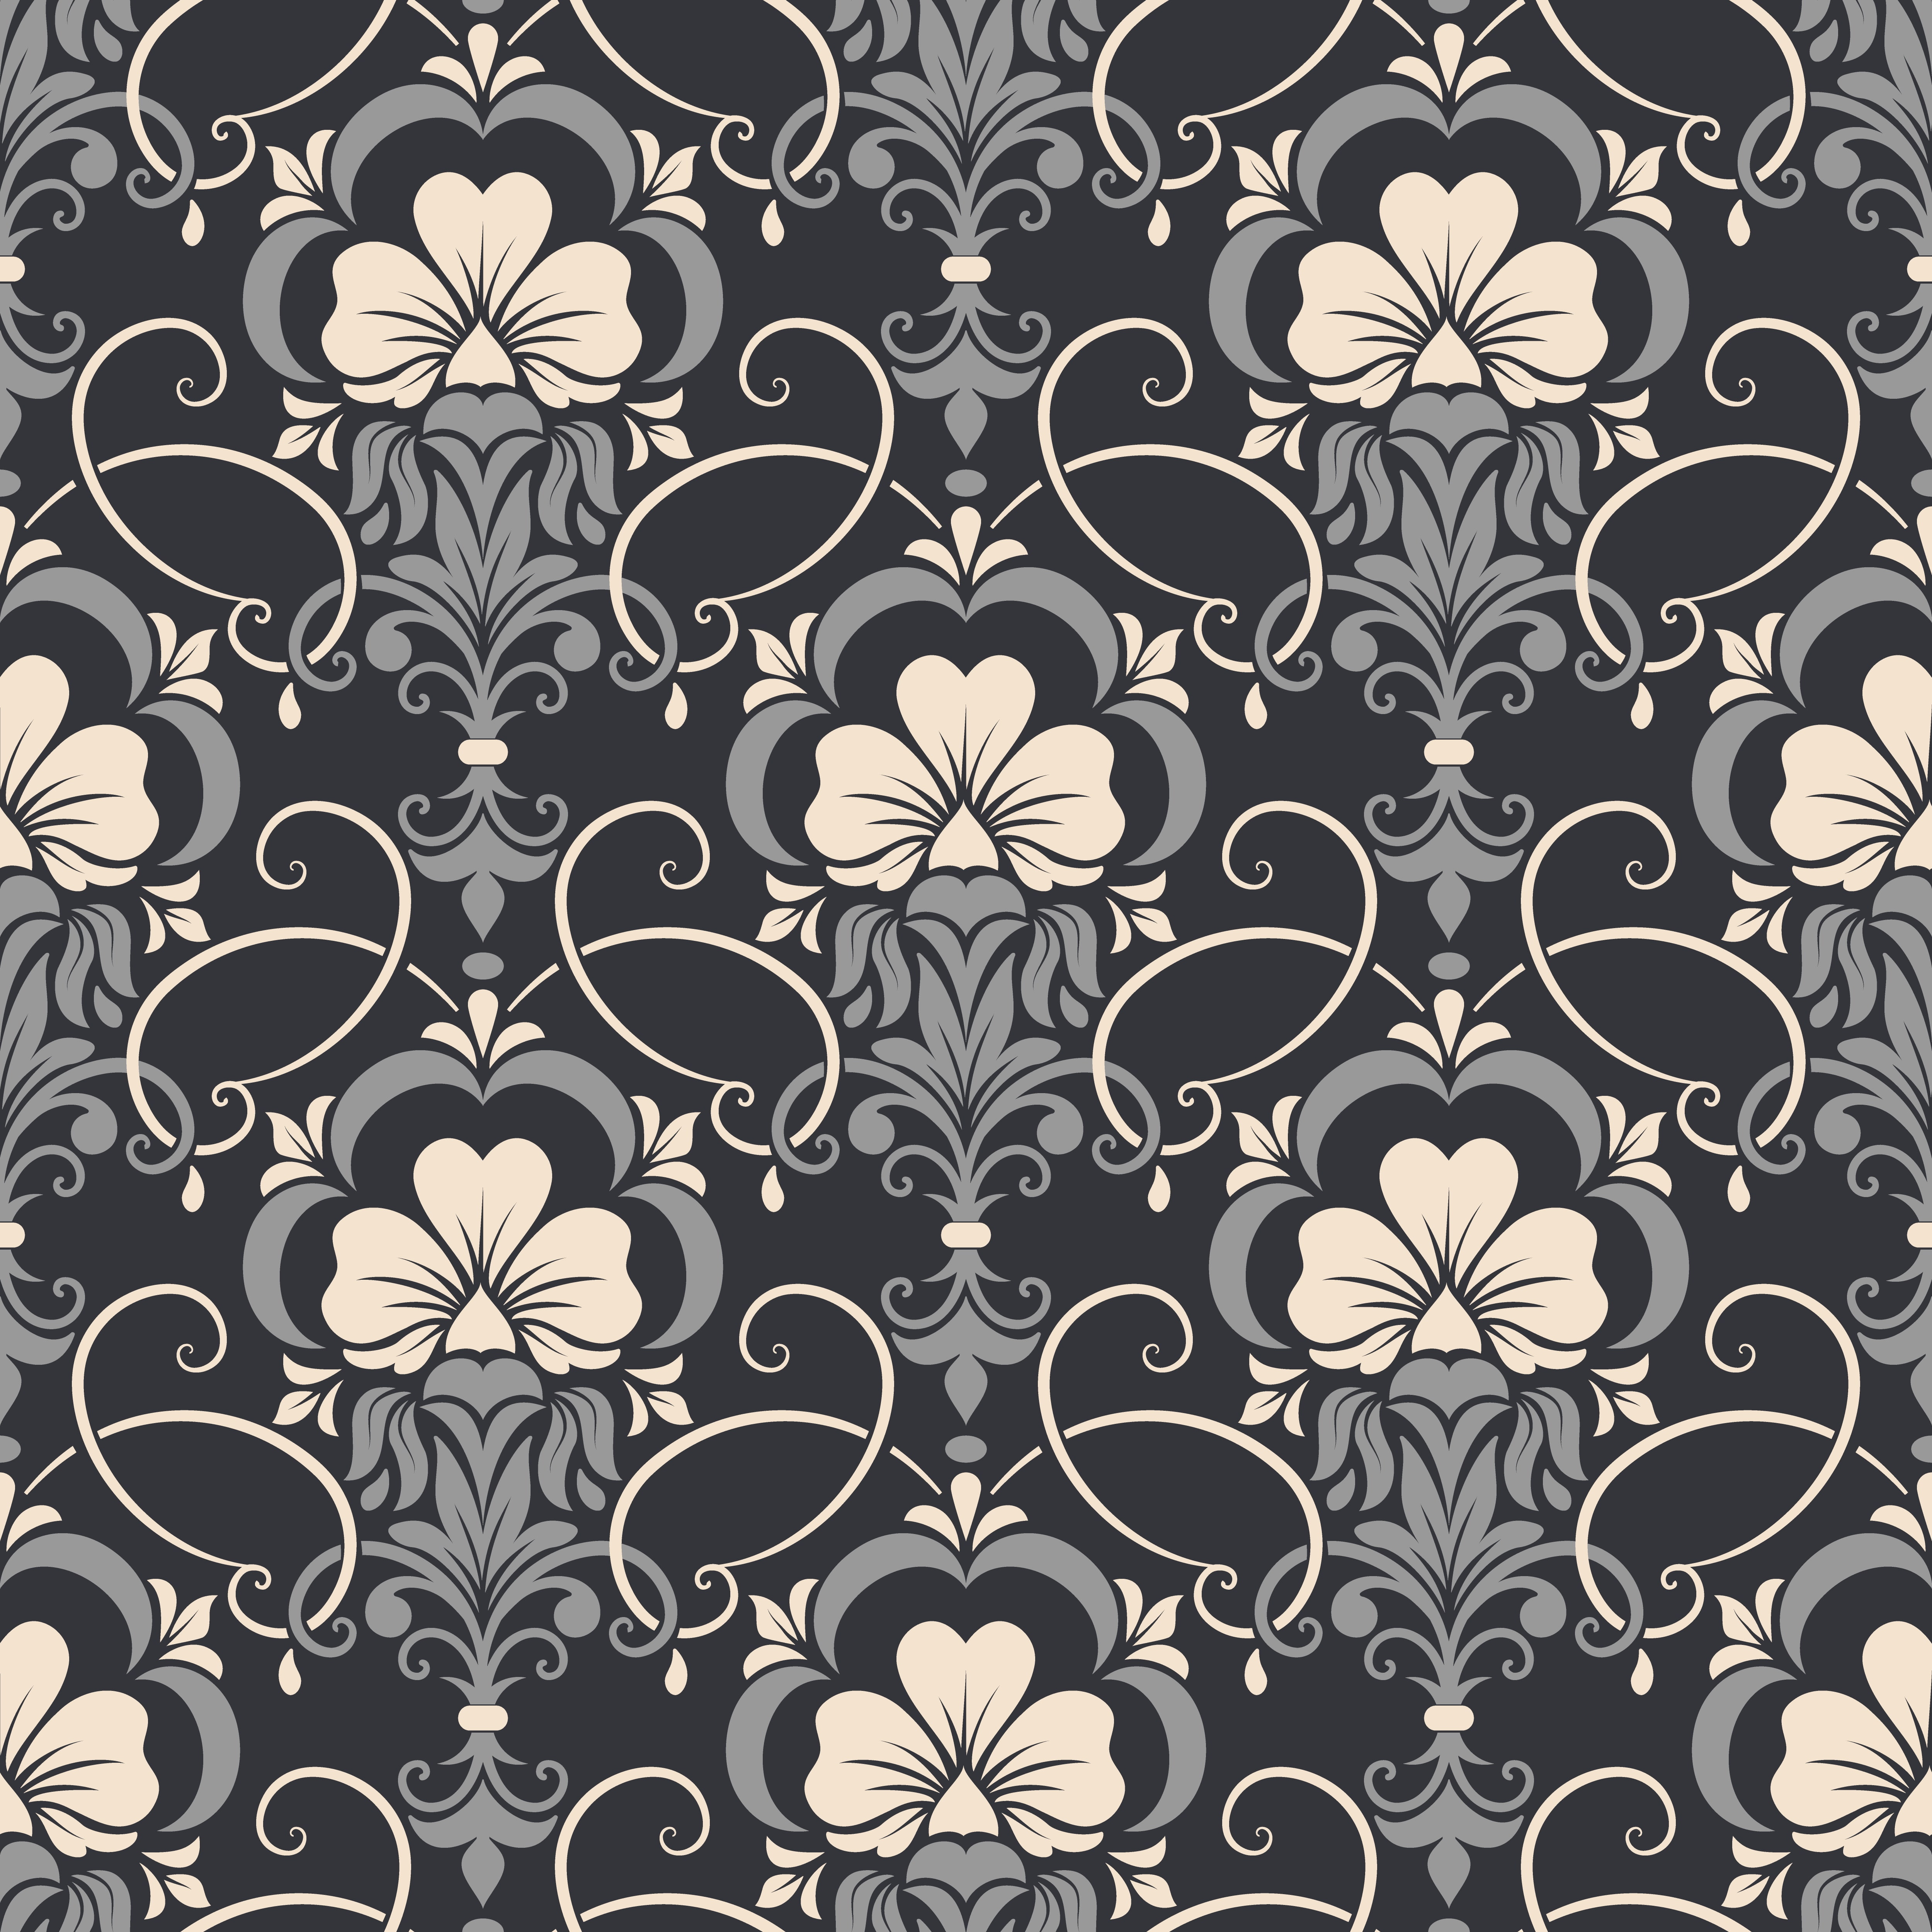 flowers, background, pattern, vector, texture, seamless, damask